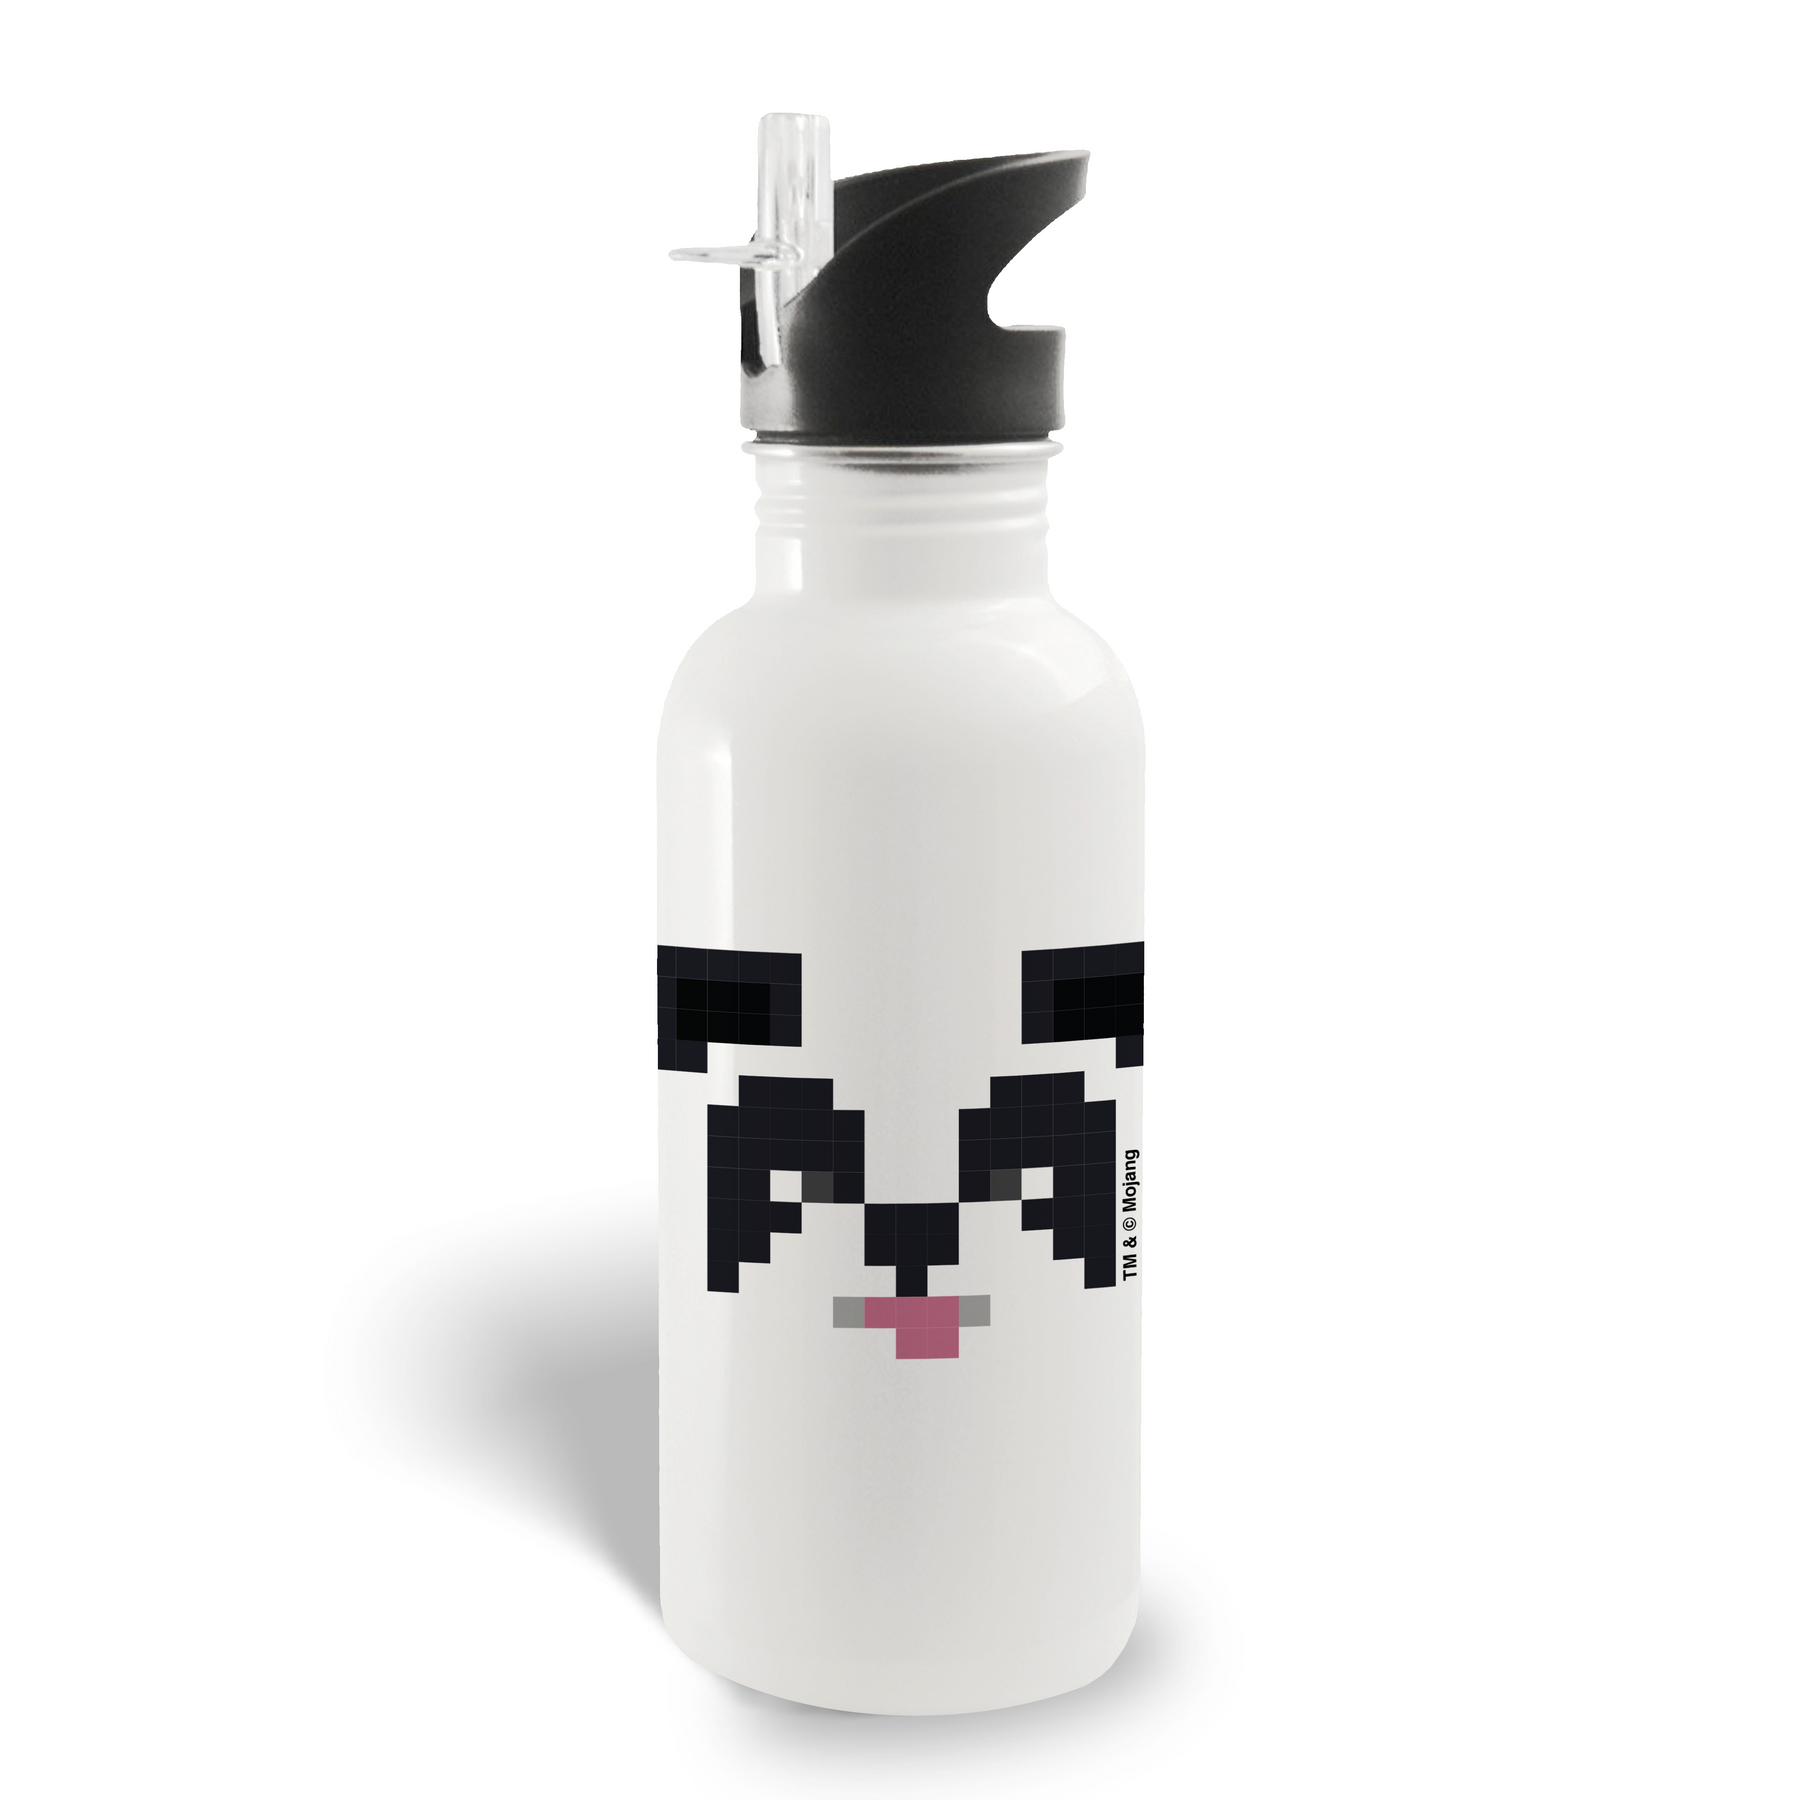 Personalized Panda Kids Water Bottle With Straw for Kids 